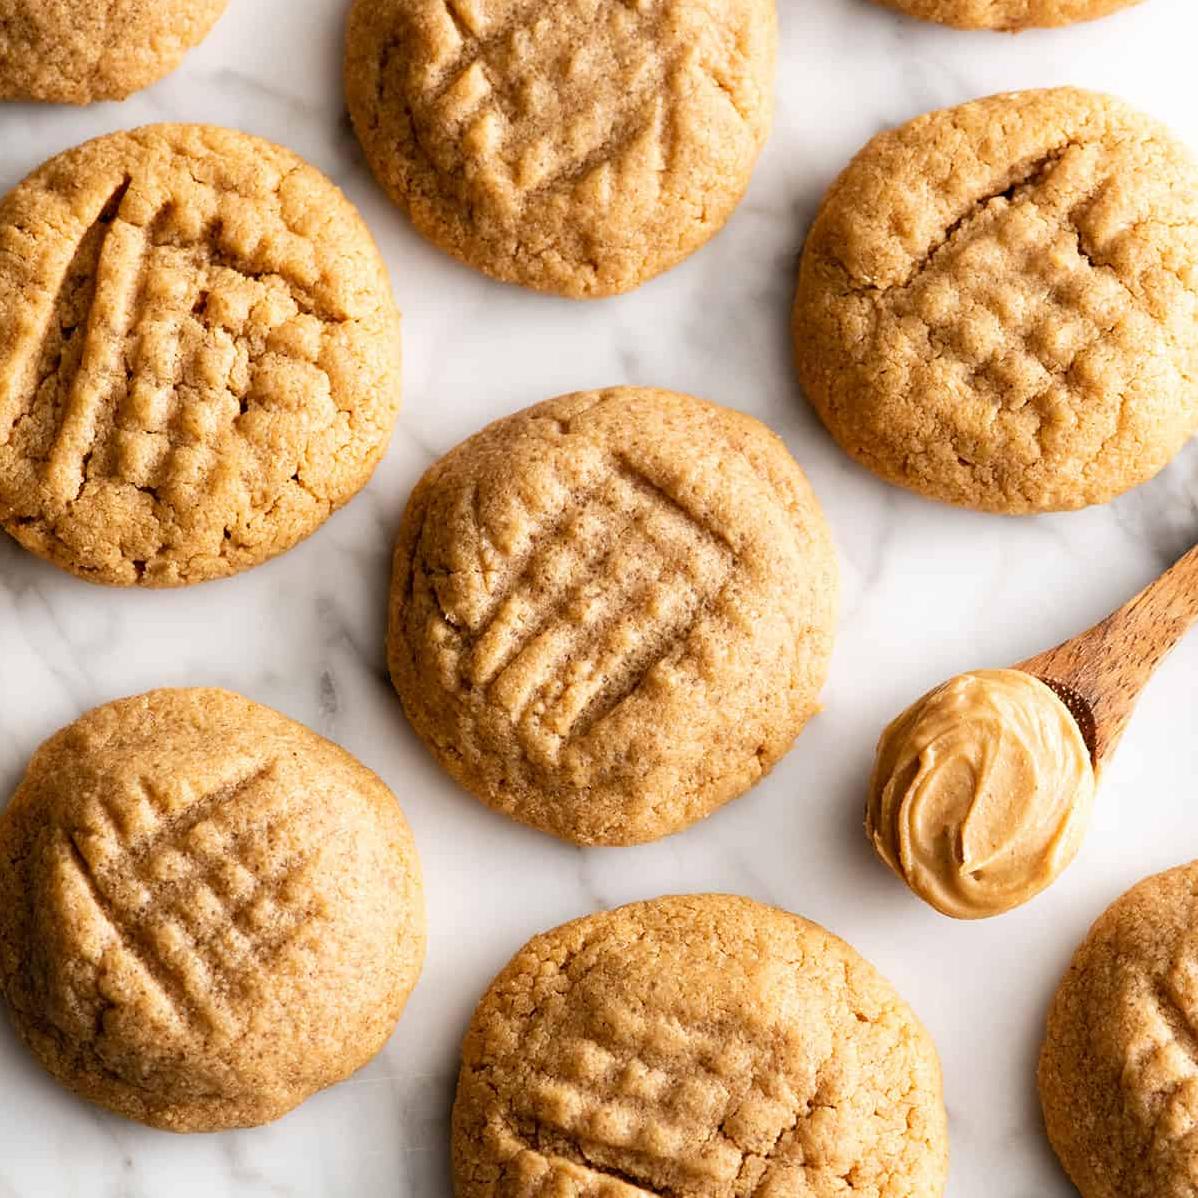  These mouthwatering gluten-free cookies are irresistibly nutty and melt-in-your-mouth